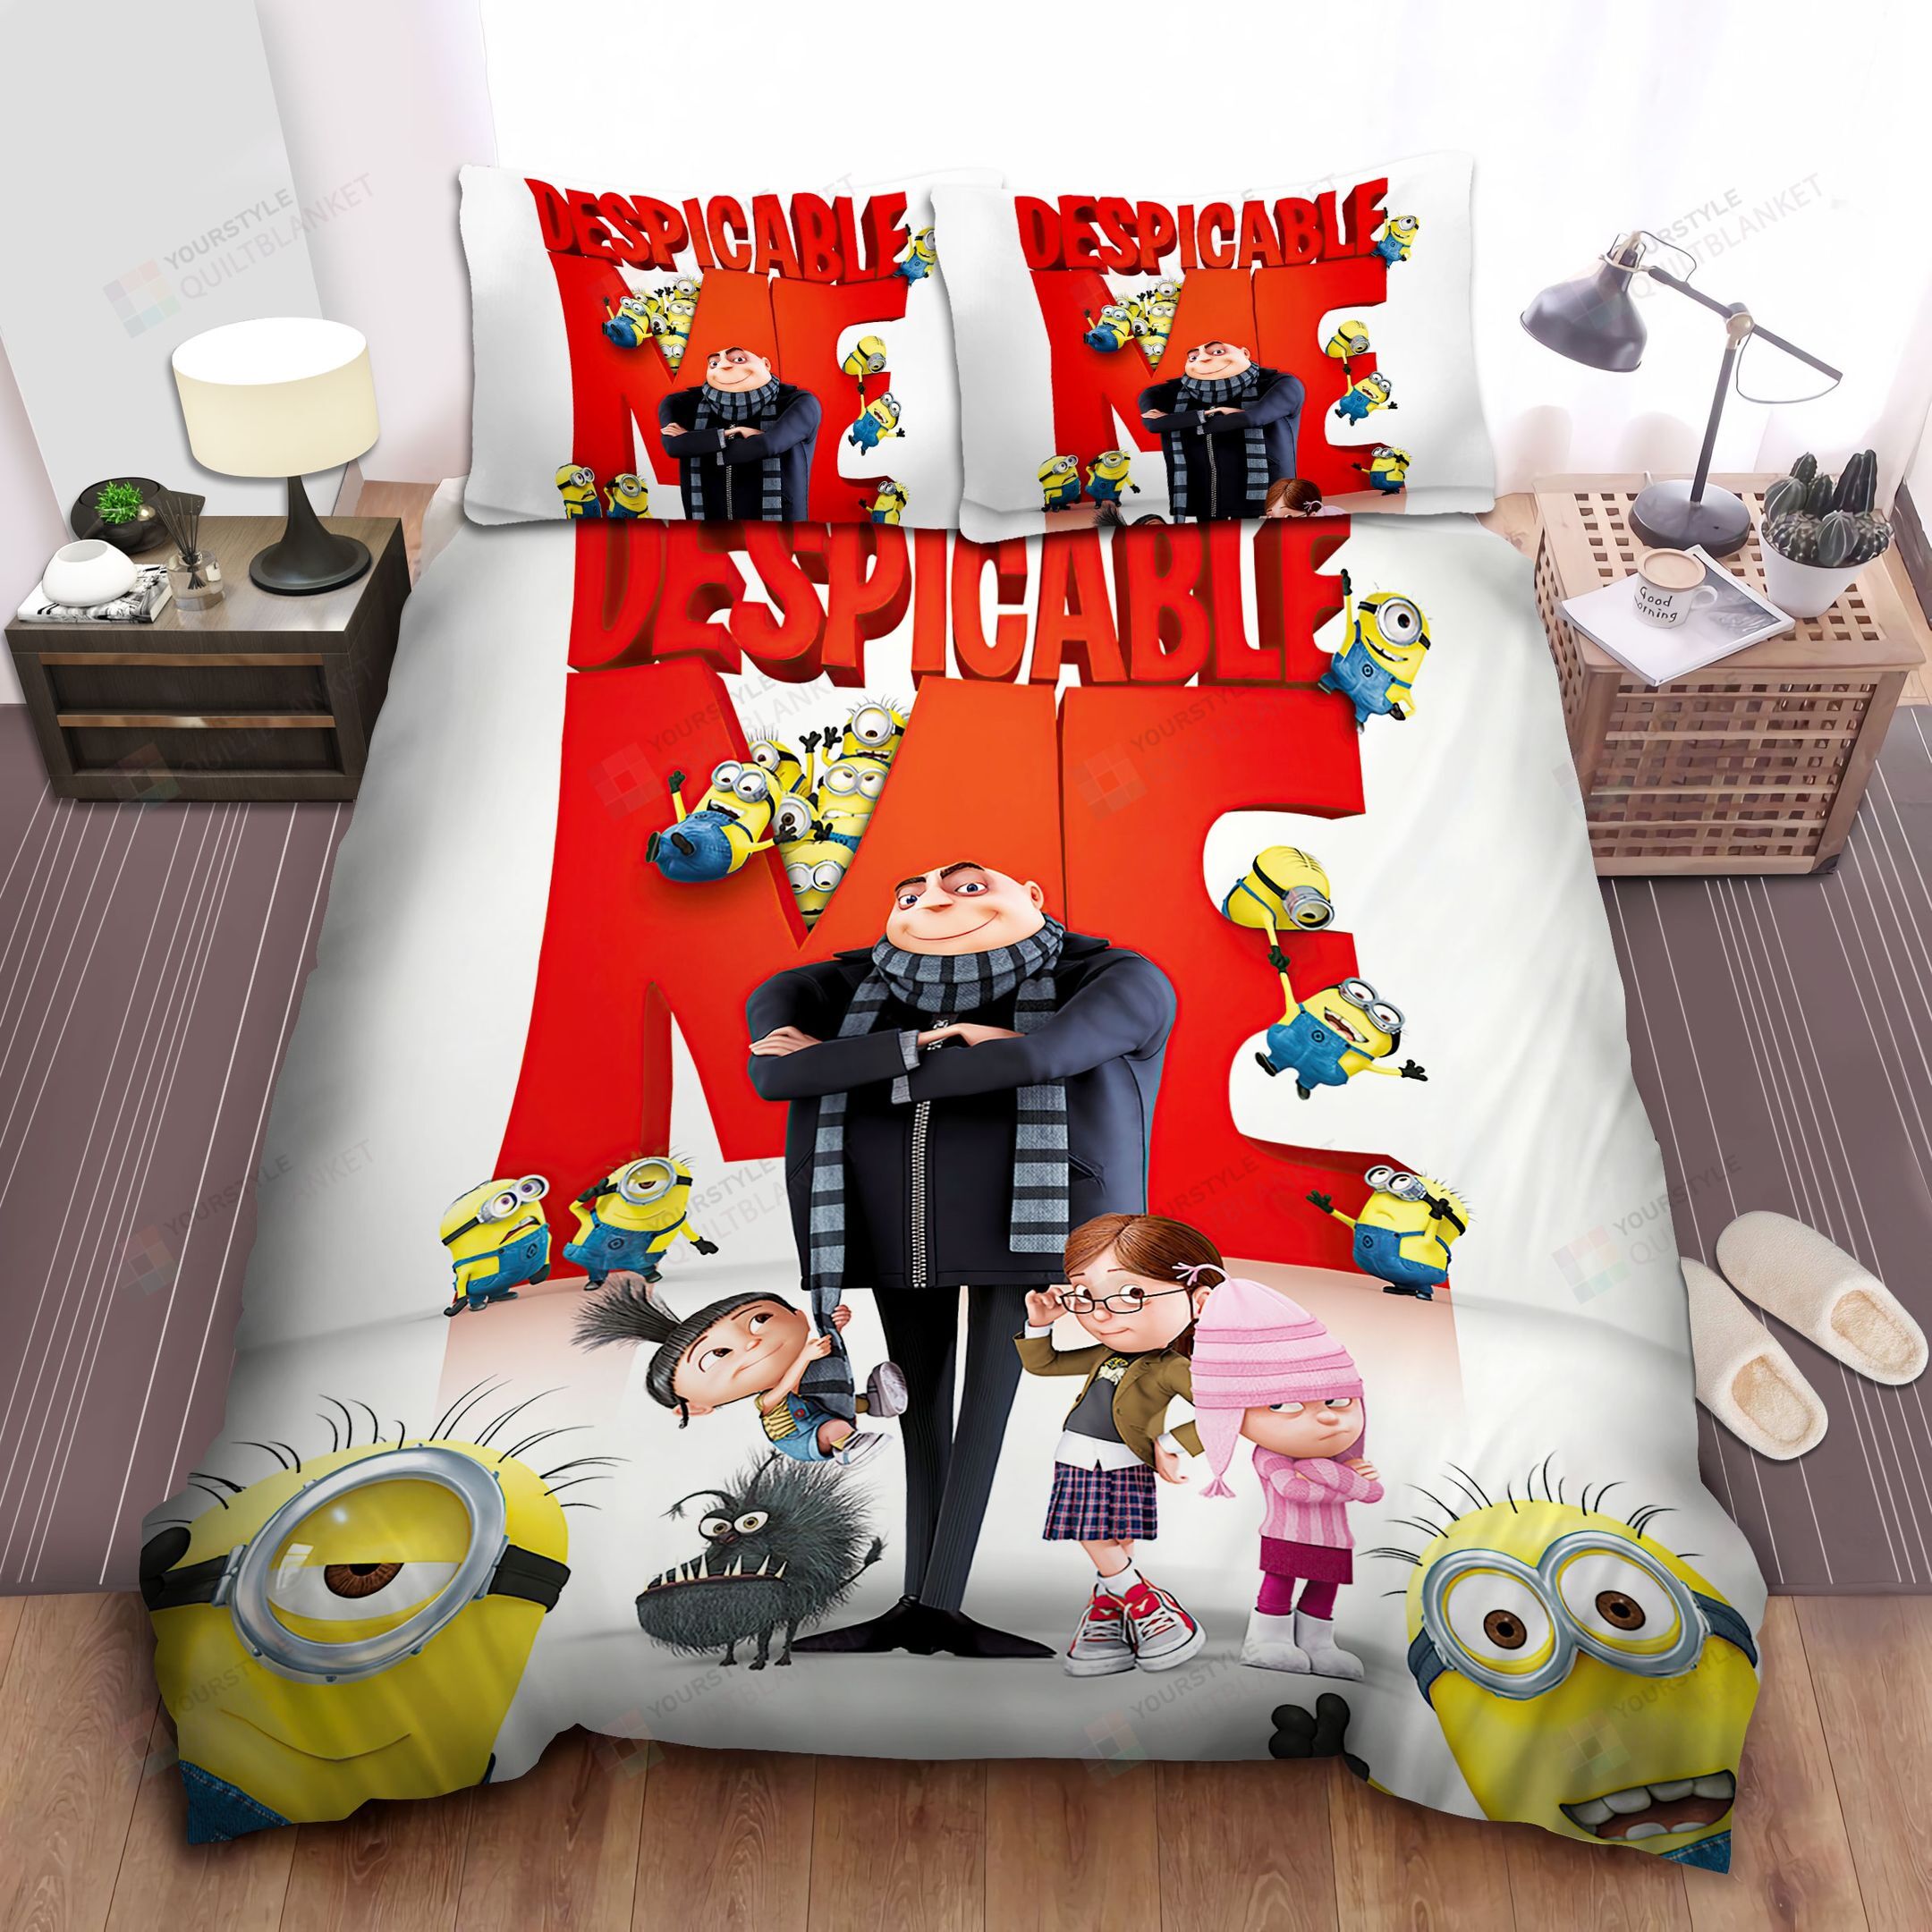 Minion In Despicable Me, Gru's Family Bed Sheets Spread Comforter Duvet Cover Bedding Sets